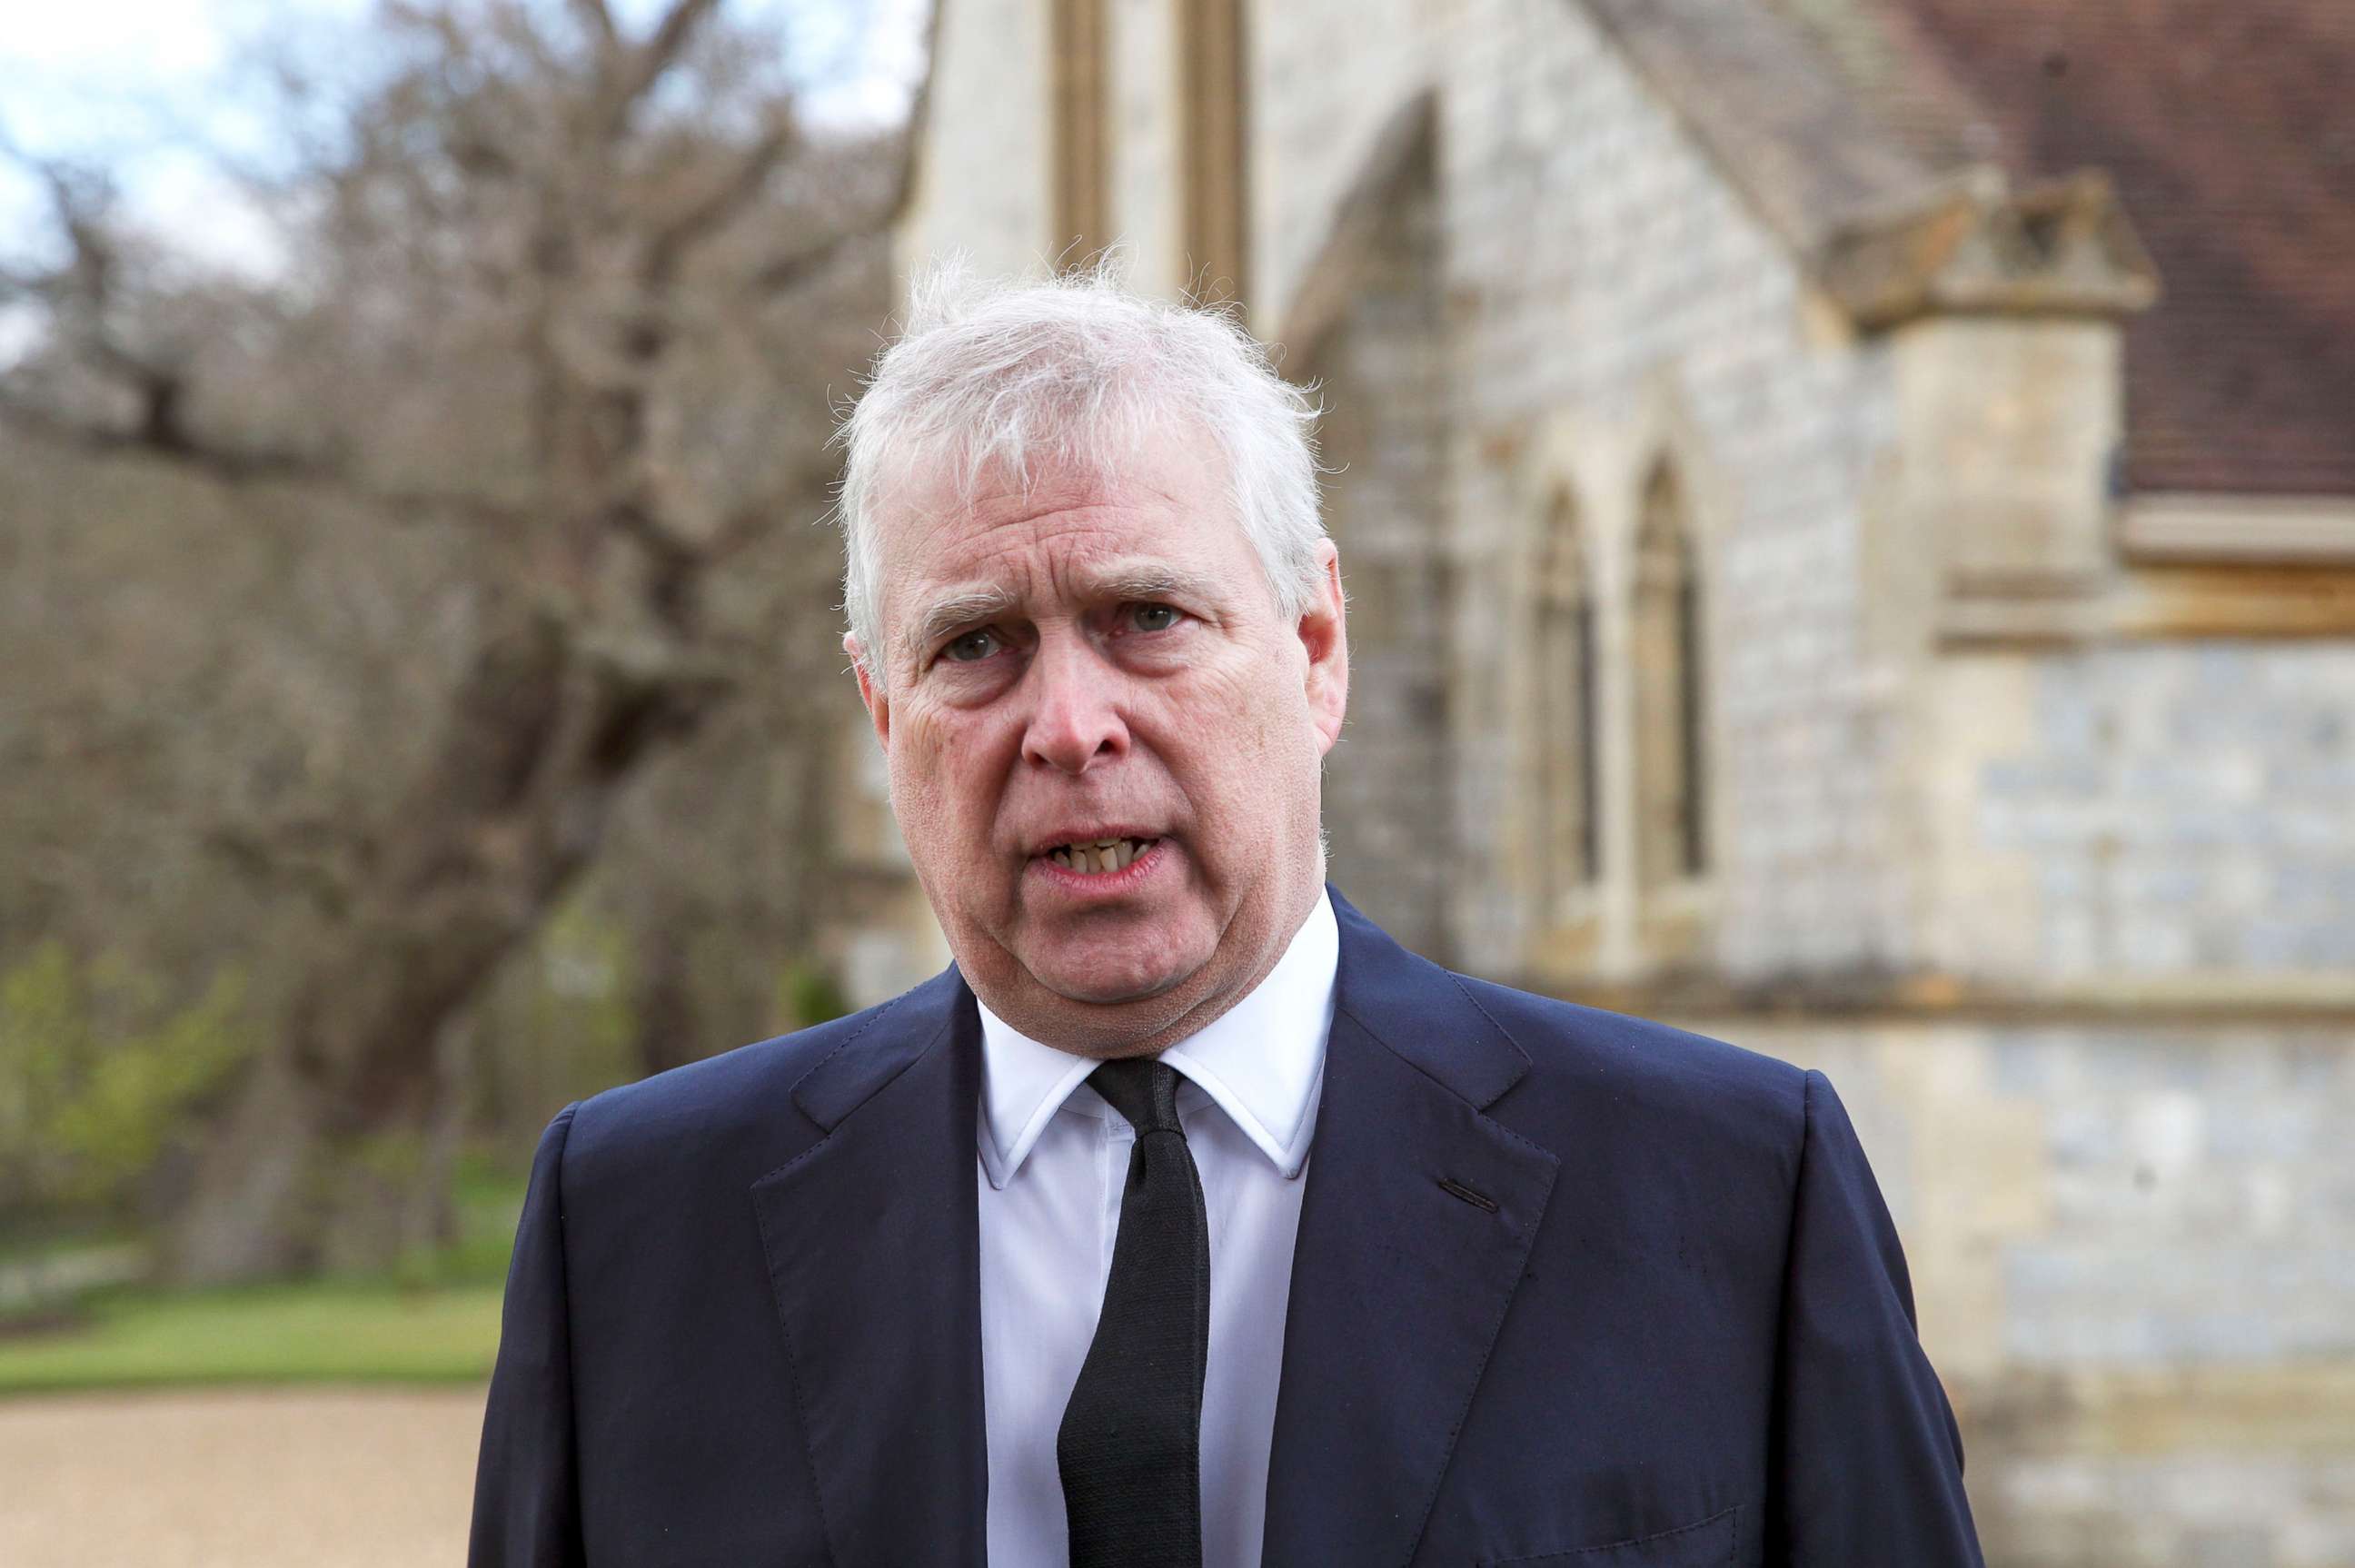 PHOTO: In this Sunday, April 11, 2021 file photo, Britain's Prince Andrew speaks during a television interview at the Royal Chapel of All Saints at Royal Lodge, Windsor, England.